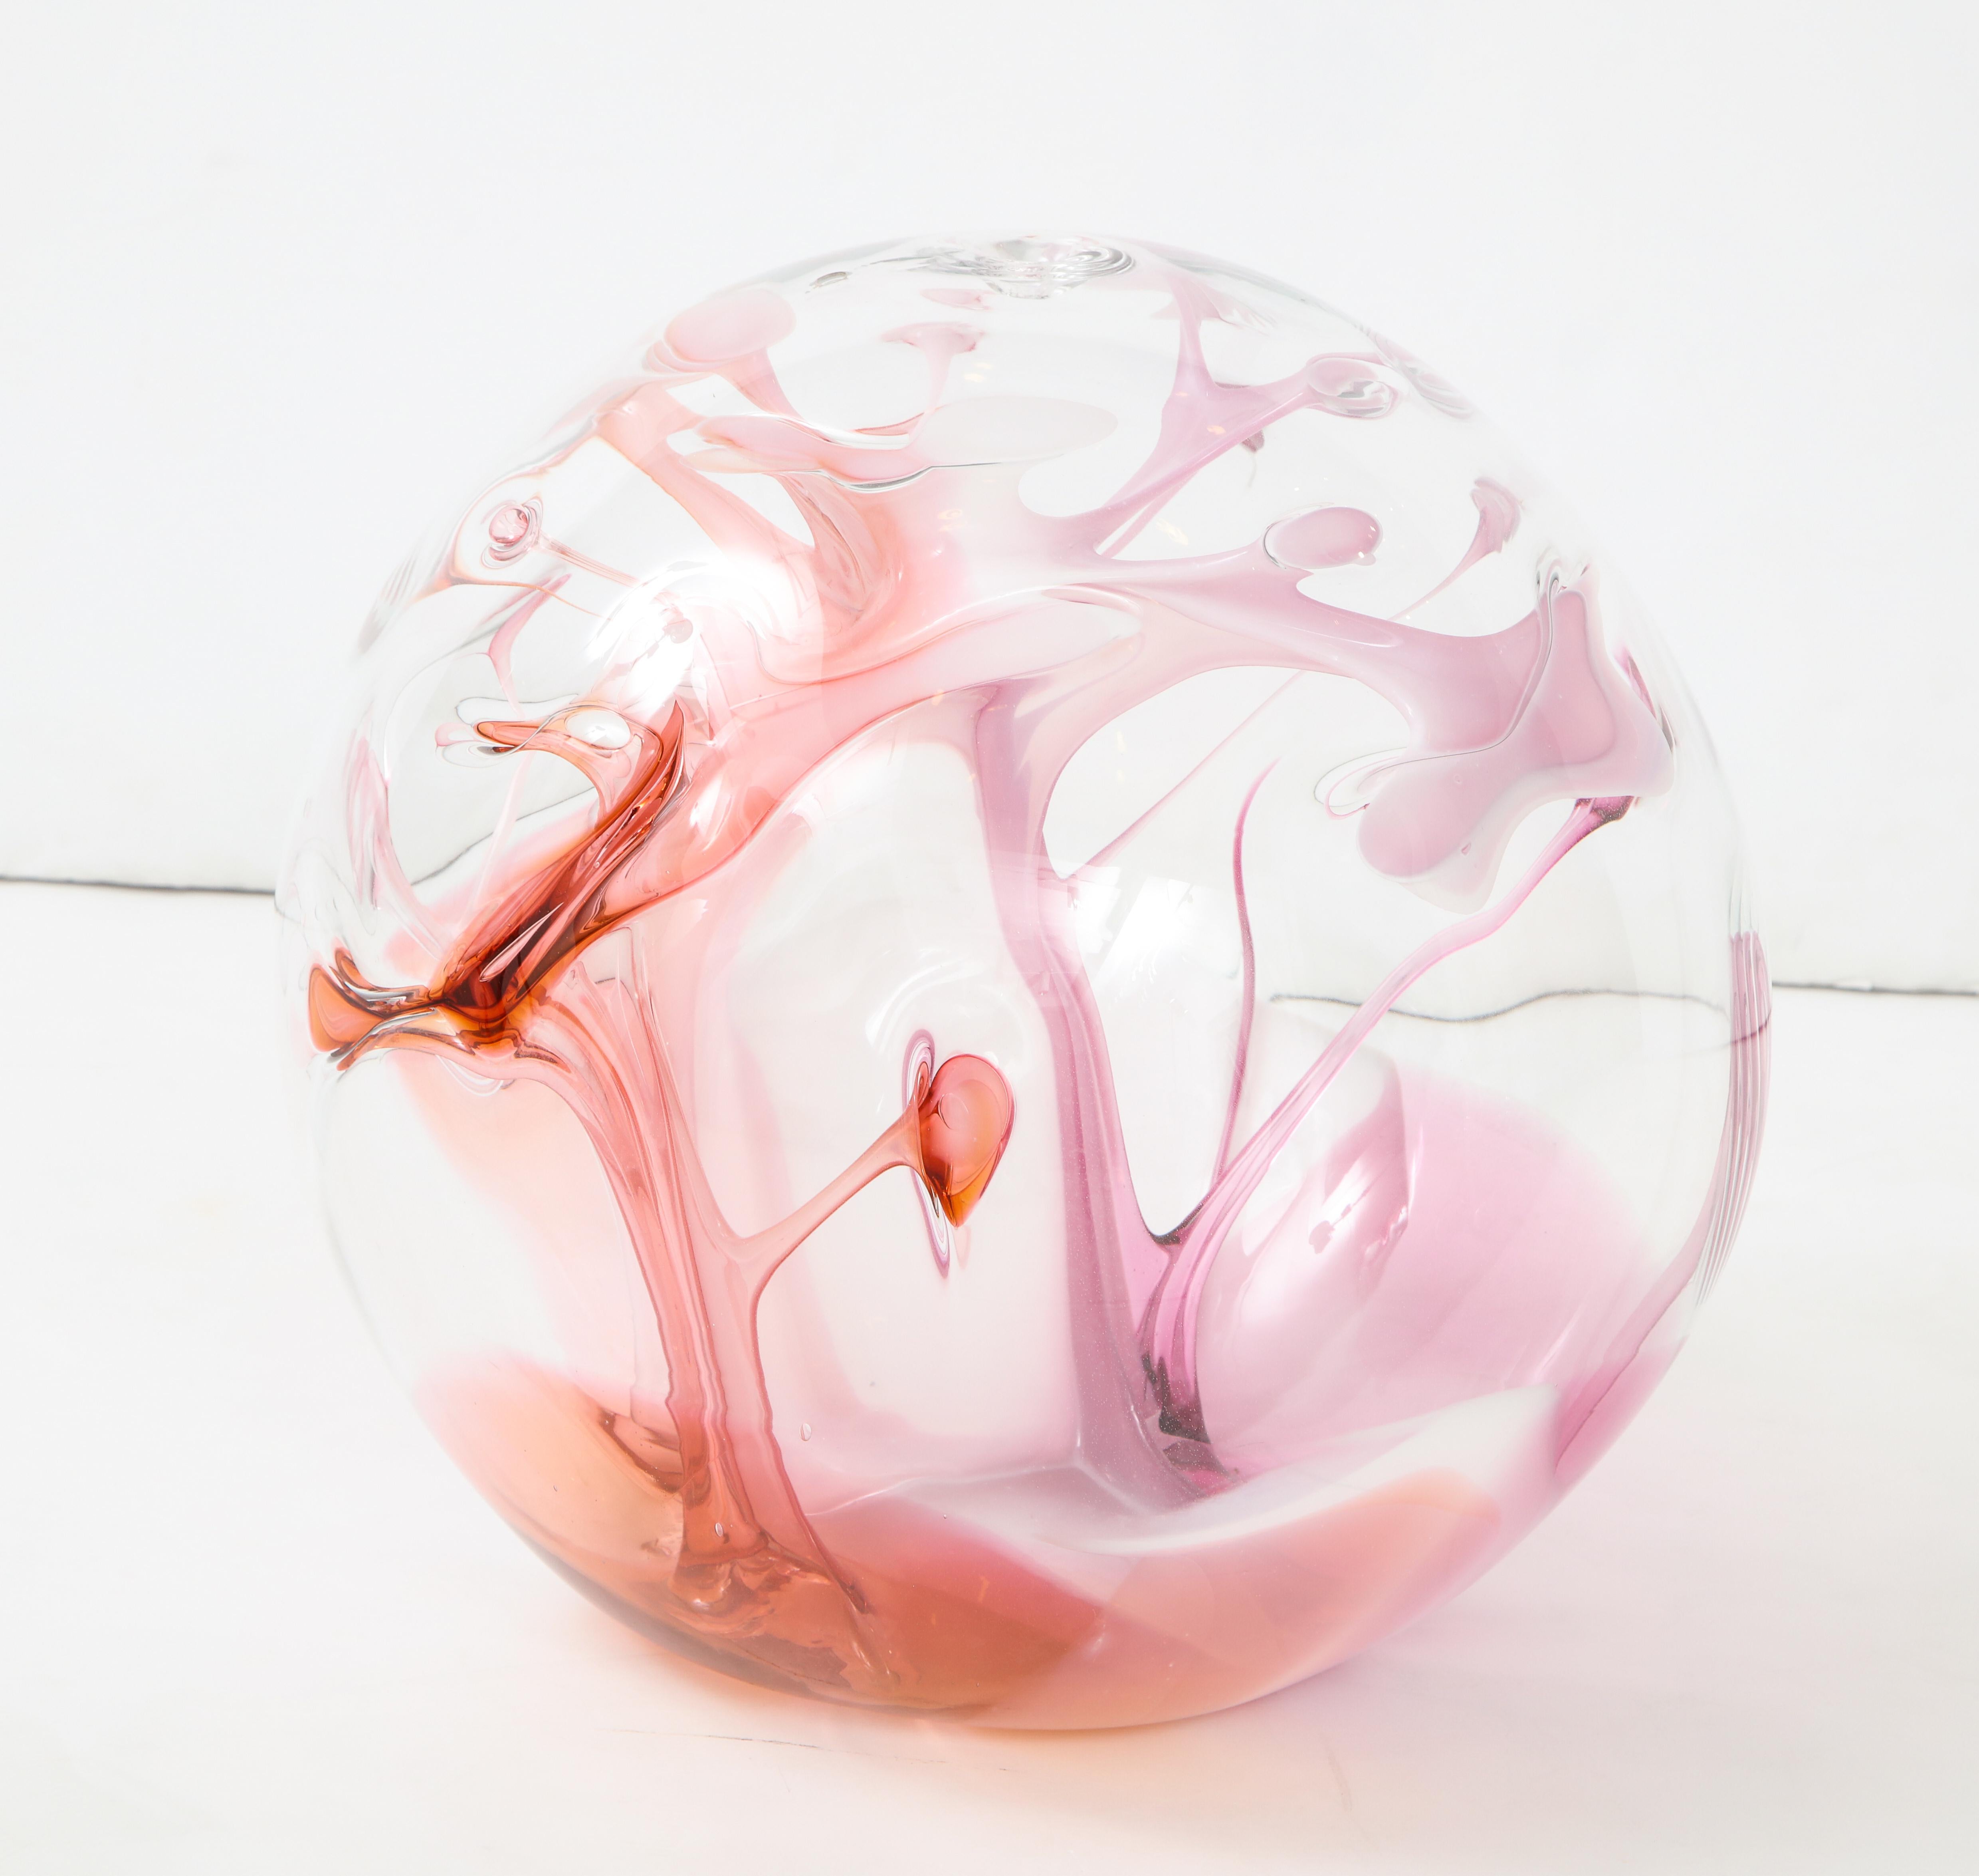 Extra larger signed and dated Peter Bramhall July 1987 glass orb sculpture
with internal glass threads of pink, red and mauve.